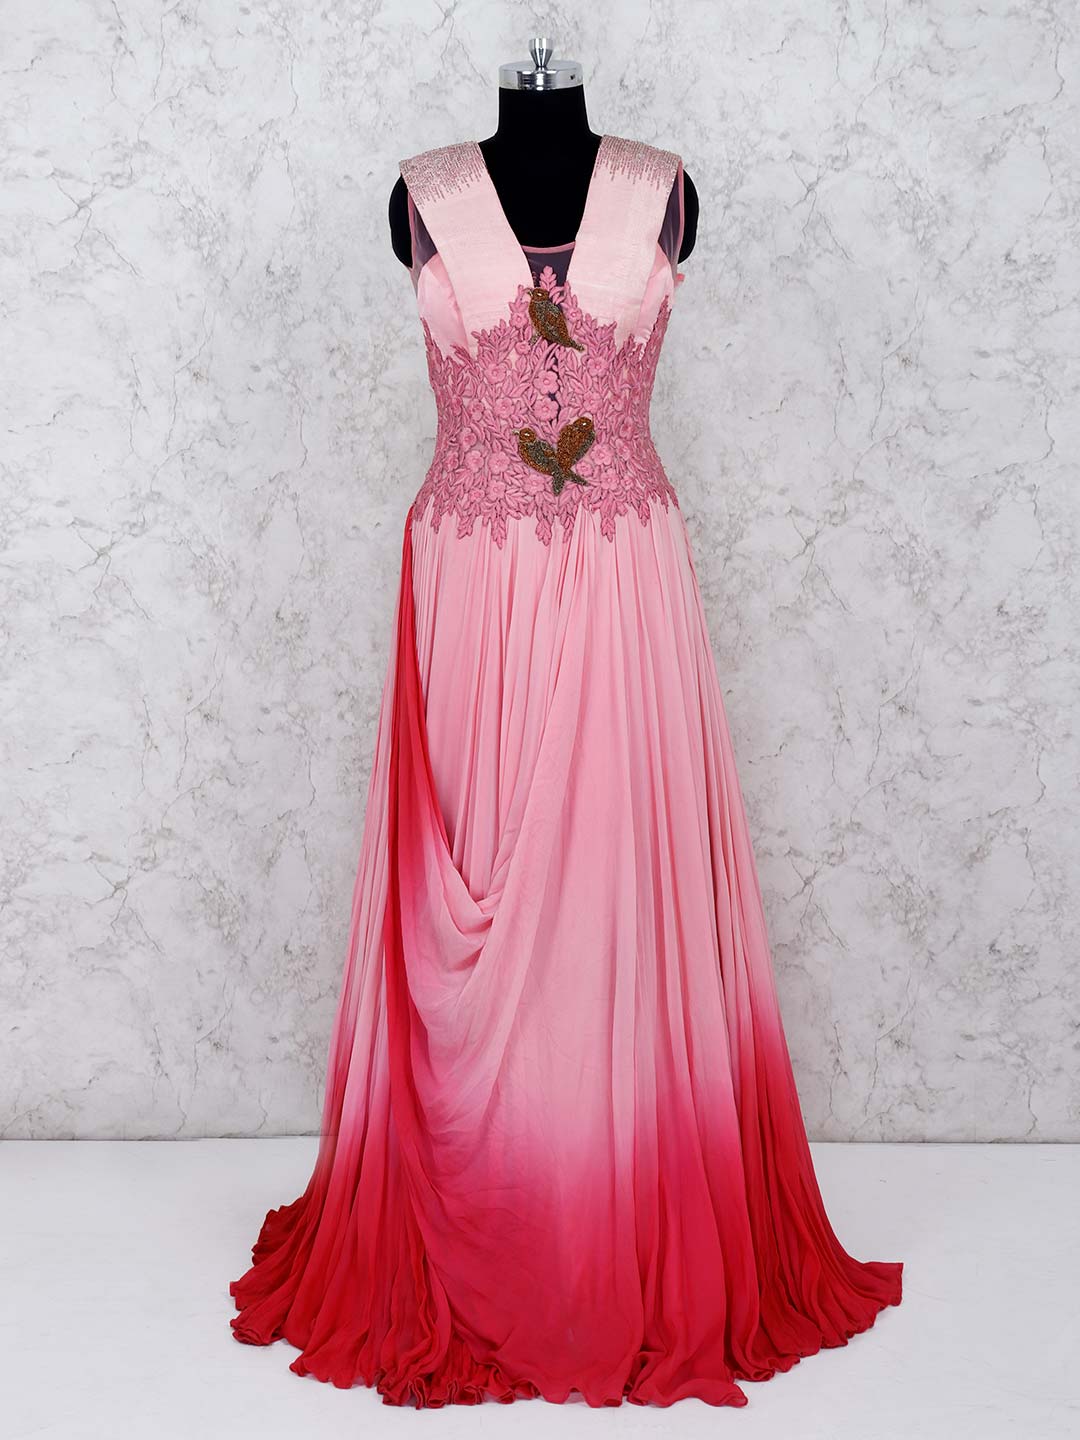 pink georgette gown